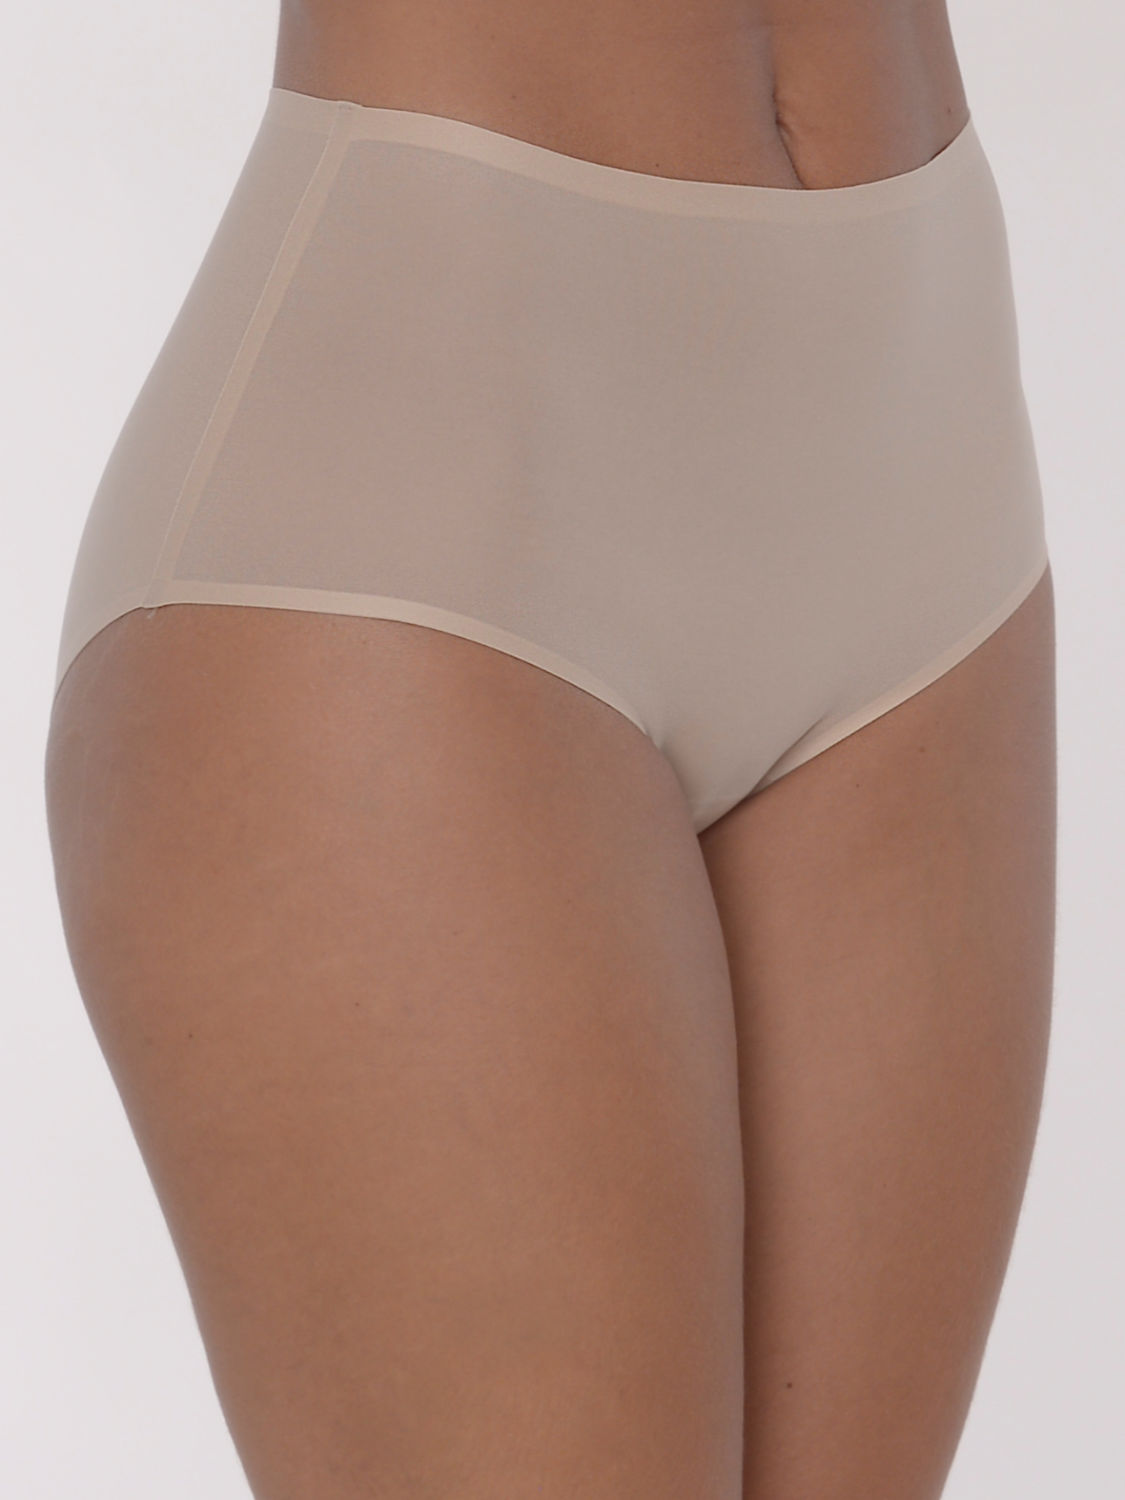 Chantelle Taillenslip ONE SIZE SoftStretch Farbe Nude